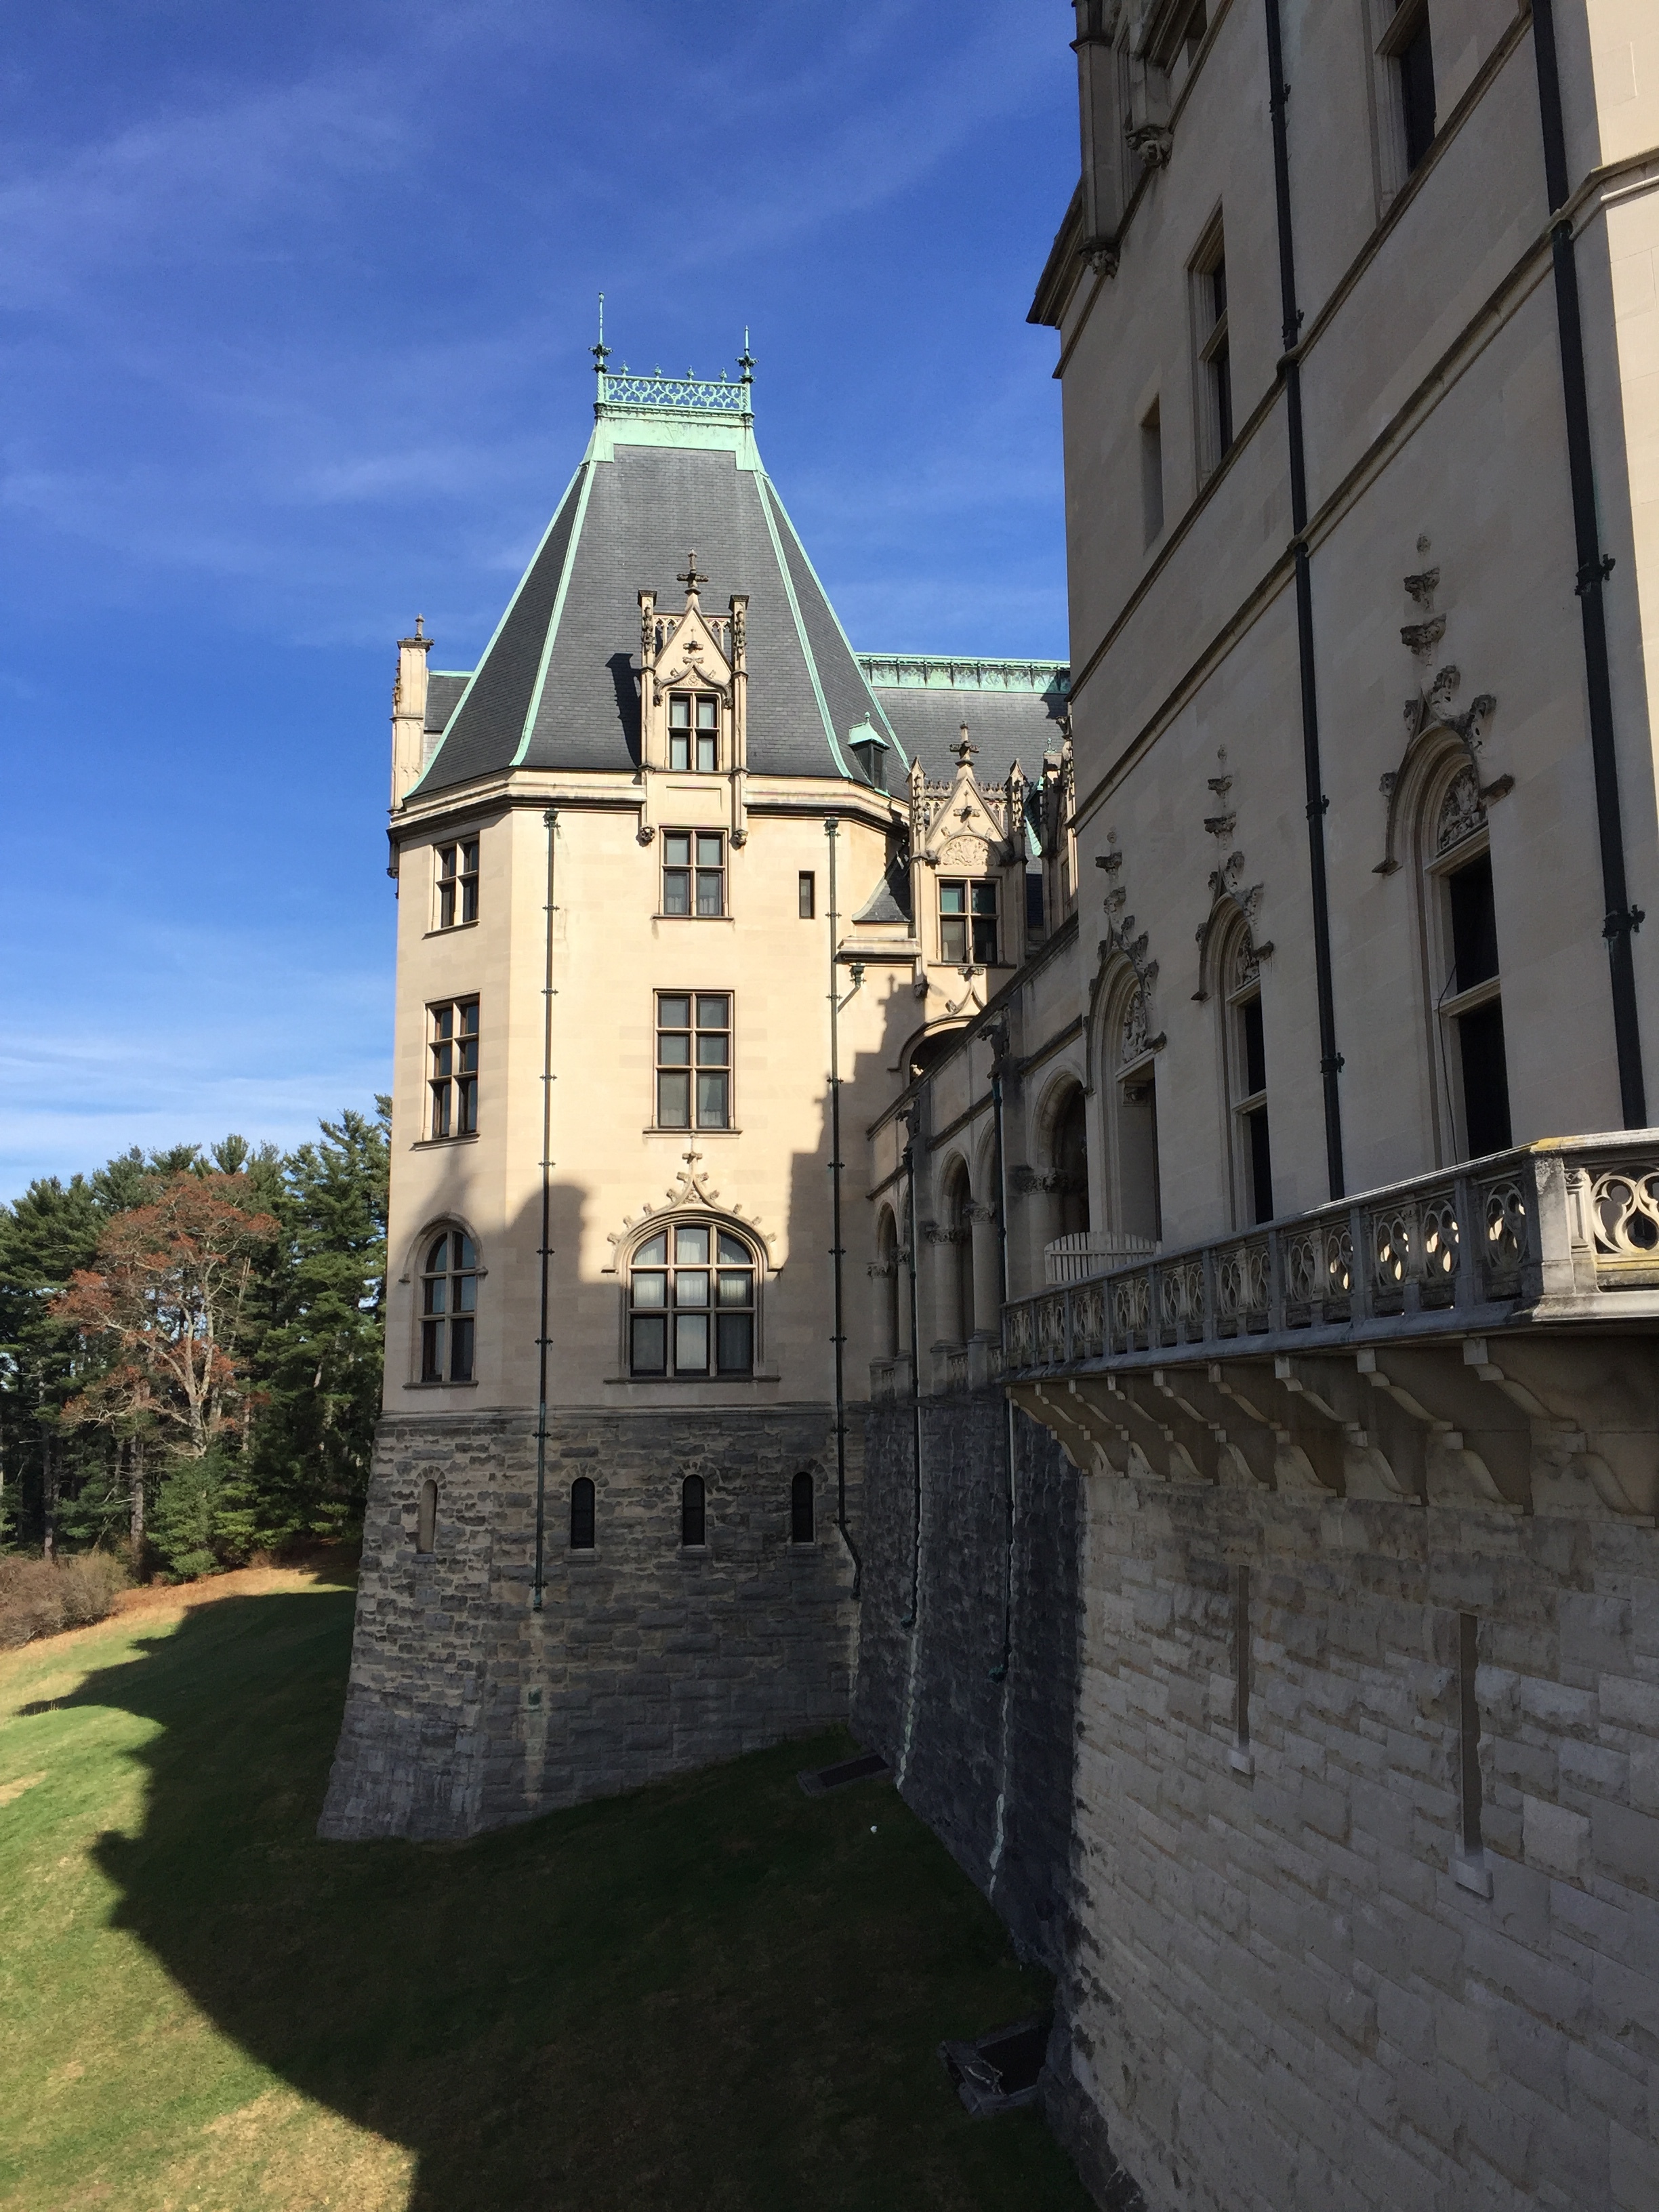 View of Biltmore House from the adjacent terrace.